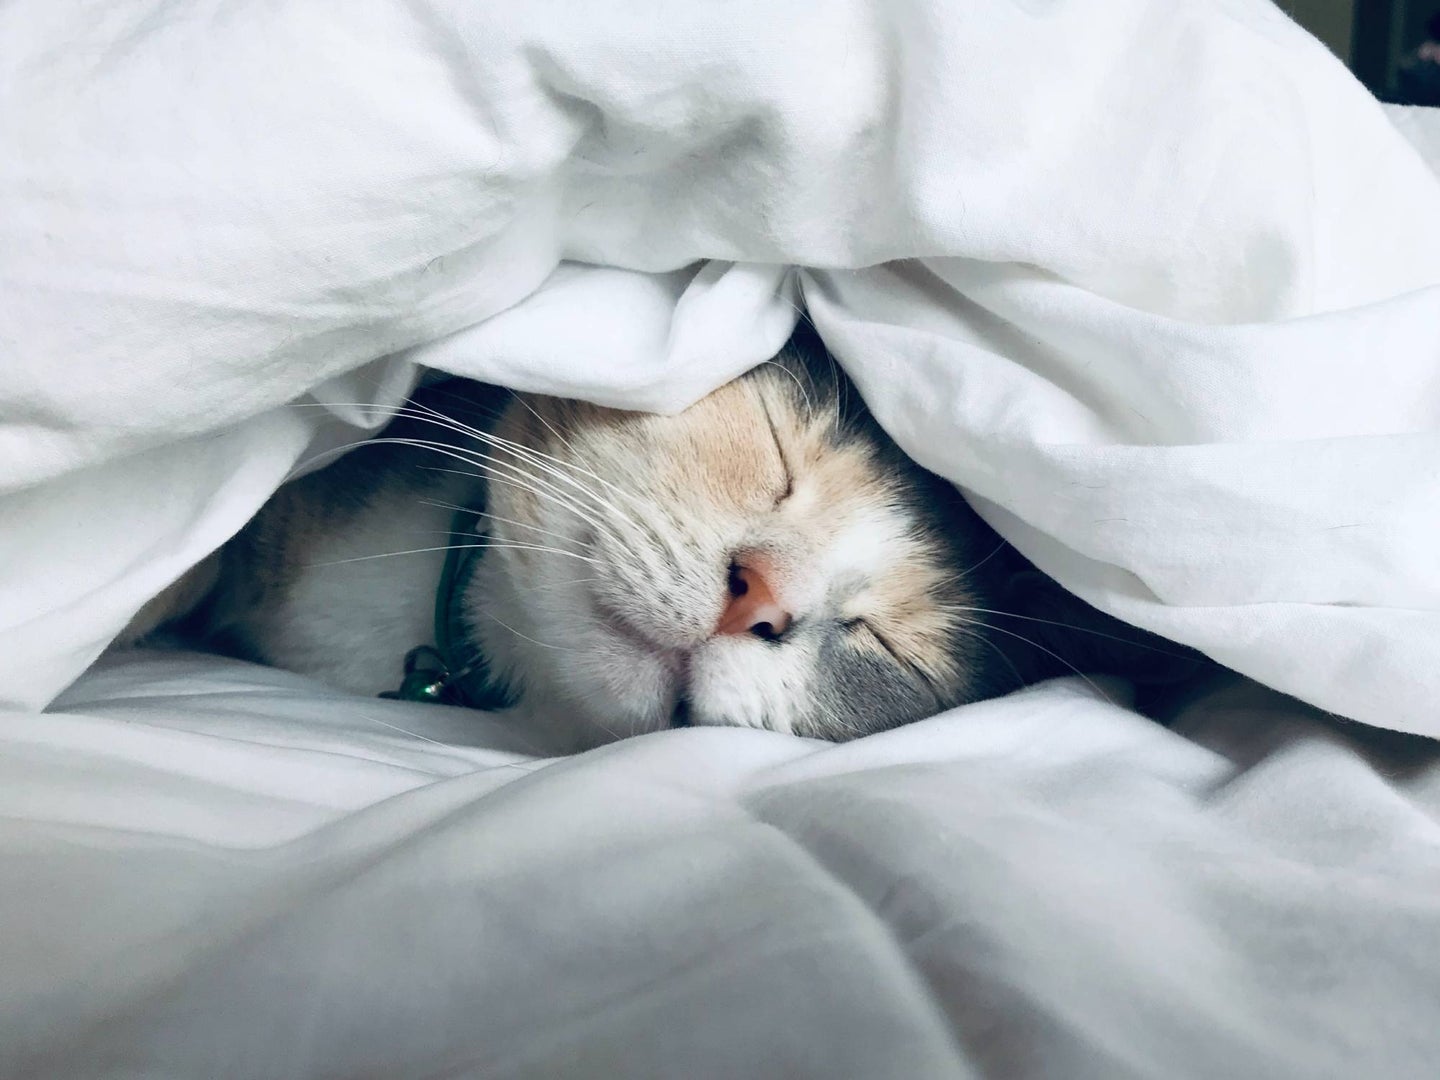 sleeping cat face peeking from under bed covers